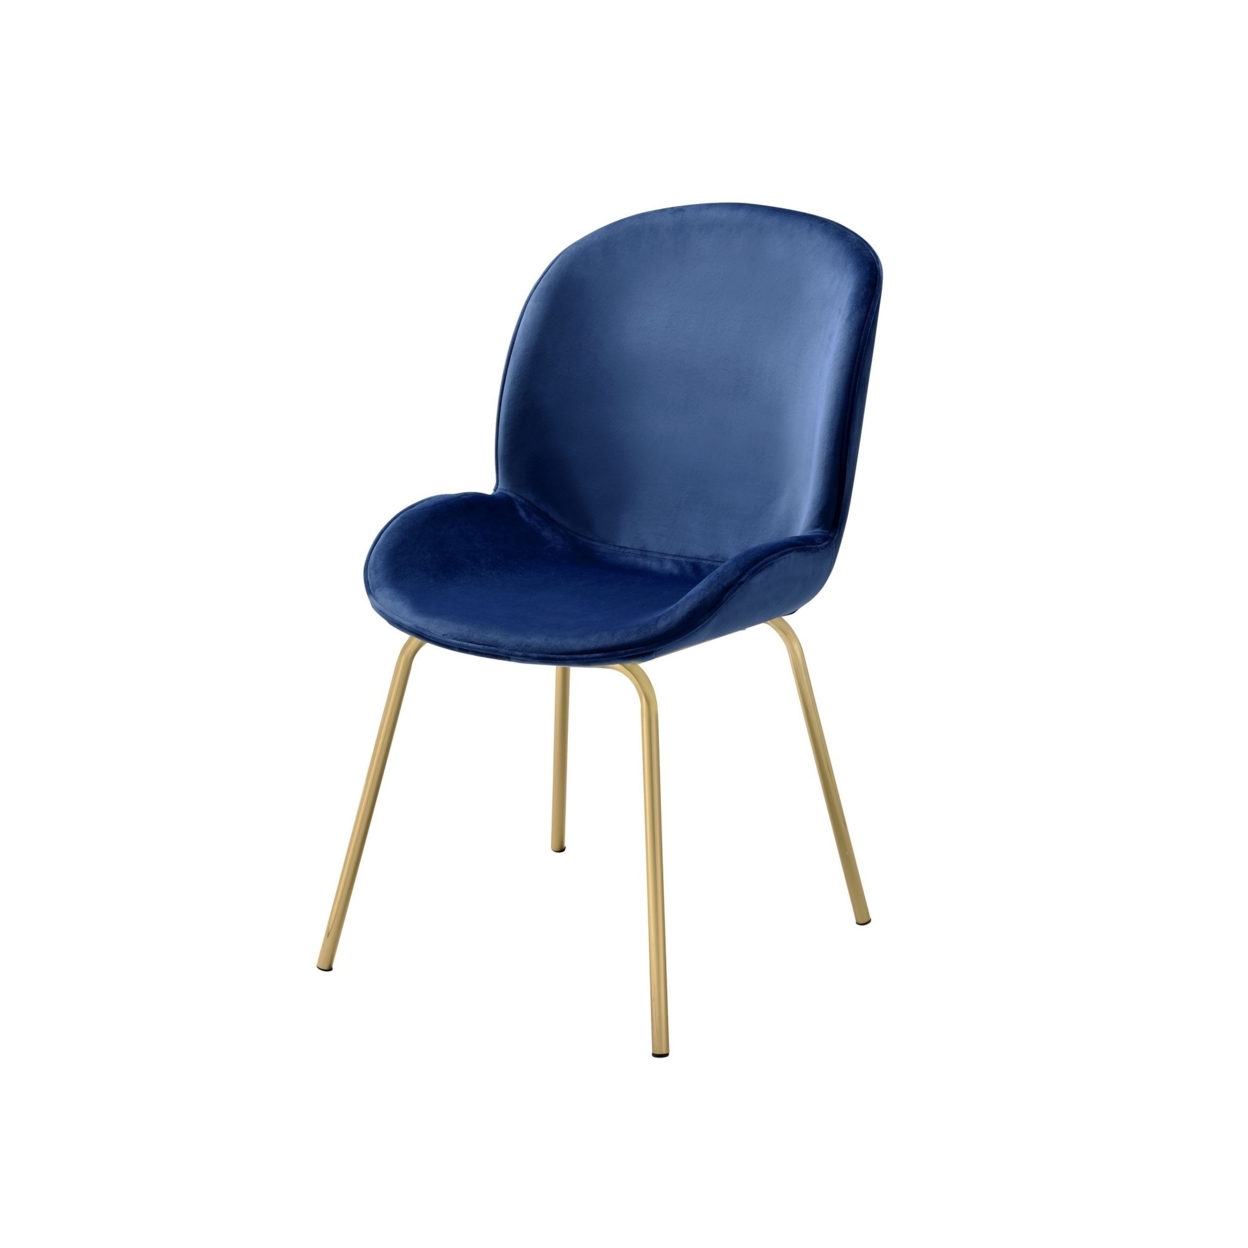 Side Chair With Fabric And Bucket Design, Set Of 2, Blue And Gold- Saltoro Sherpi